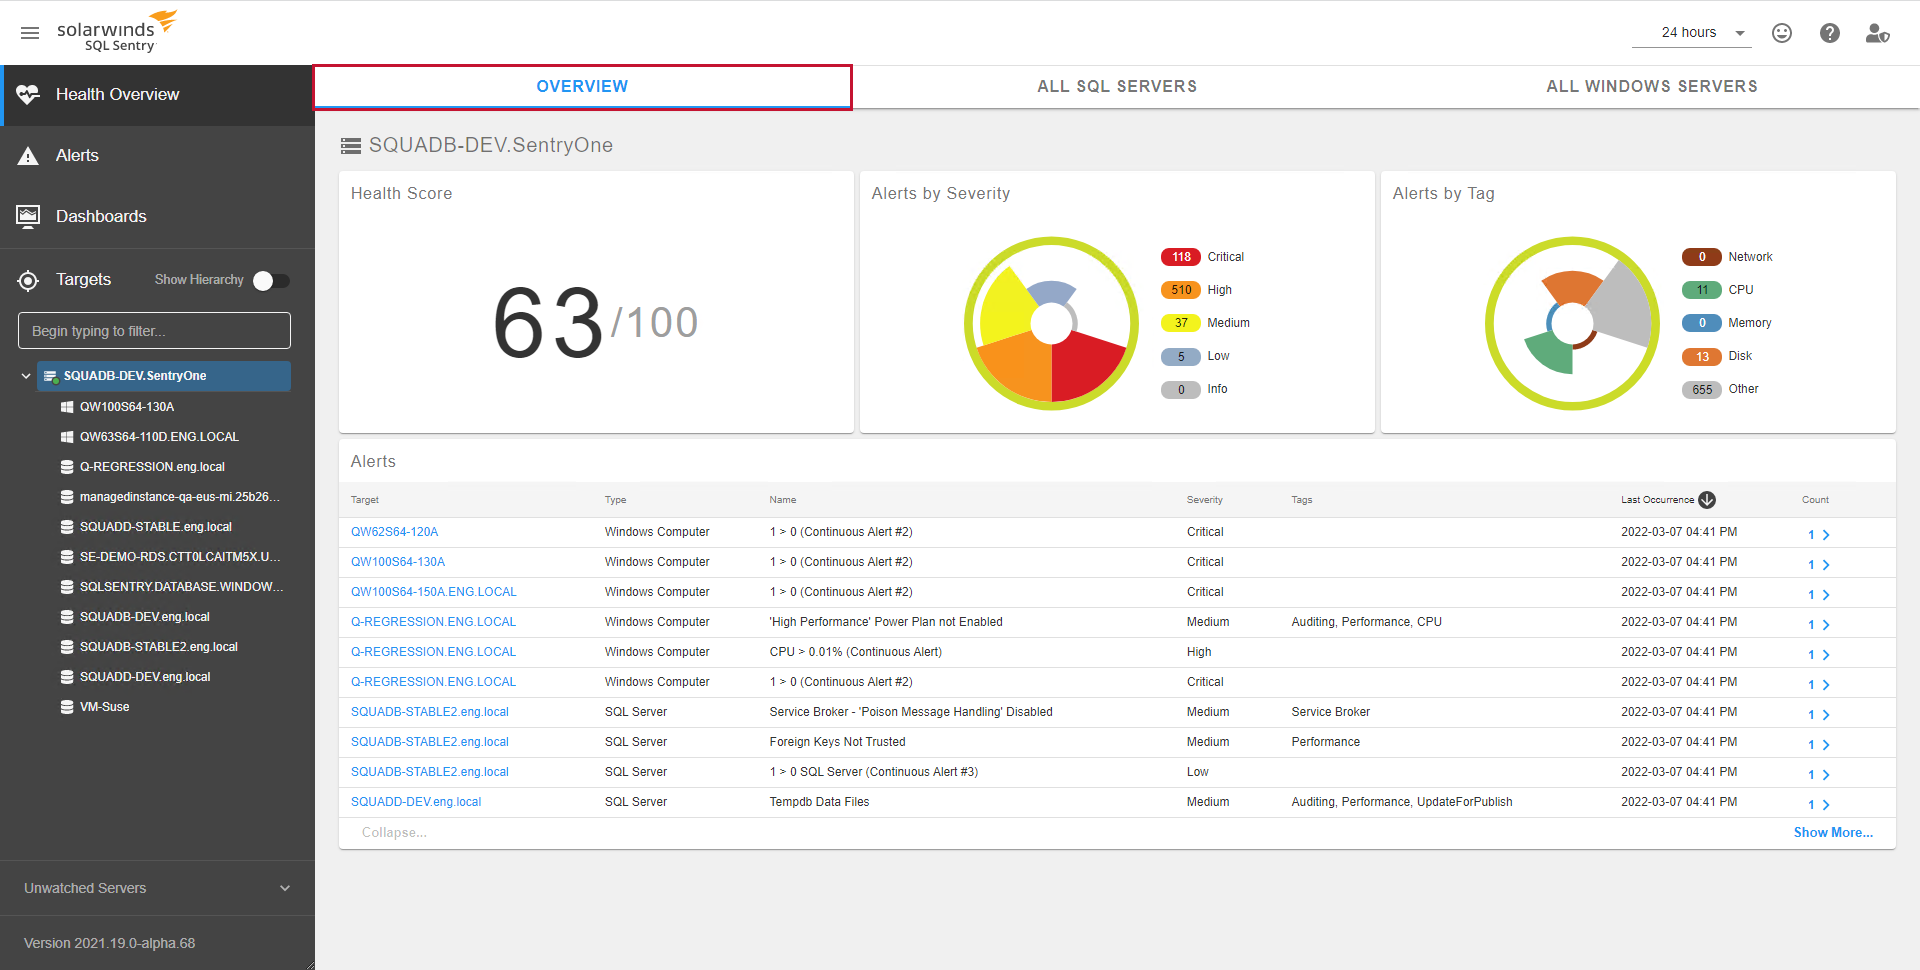 SQL Sentry Portal Overview displaying a 72/100 Health Score, Alerts by Severity and Tag, and a list of selectable Alerts.